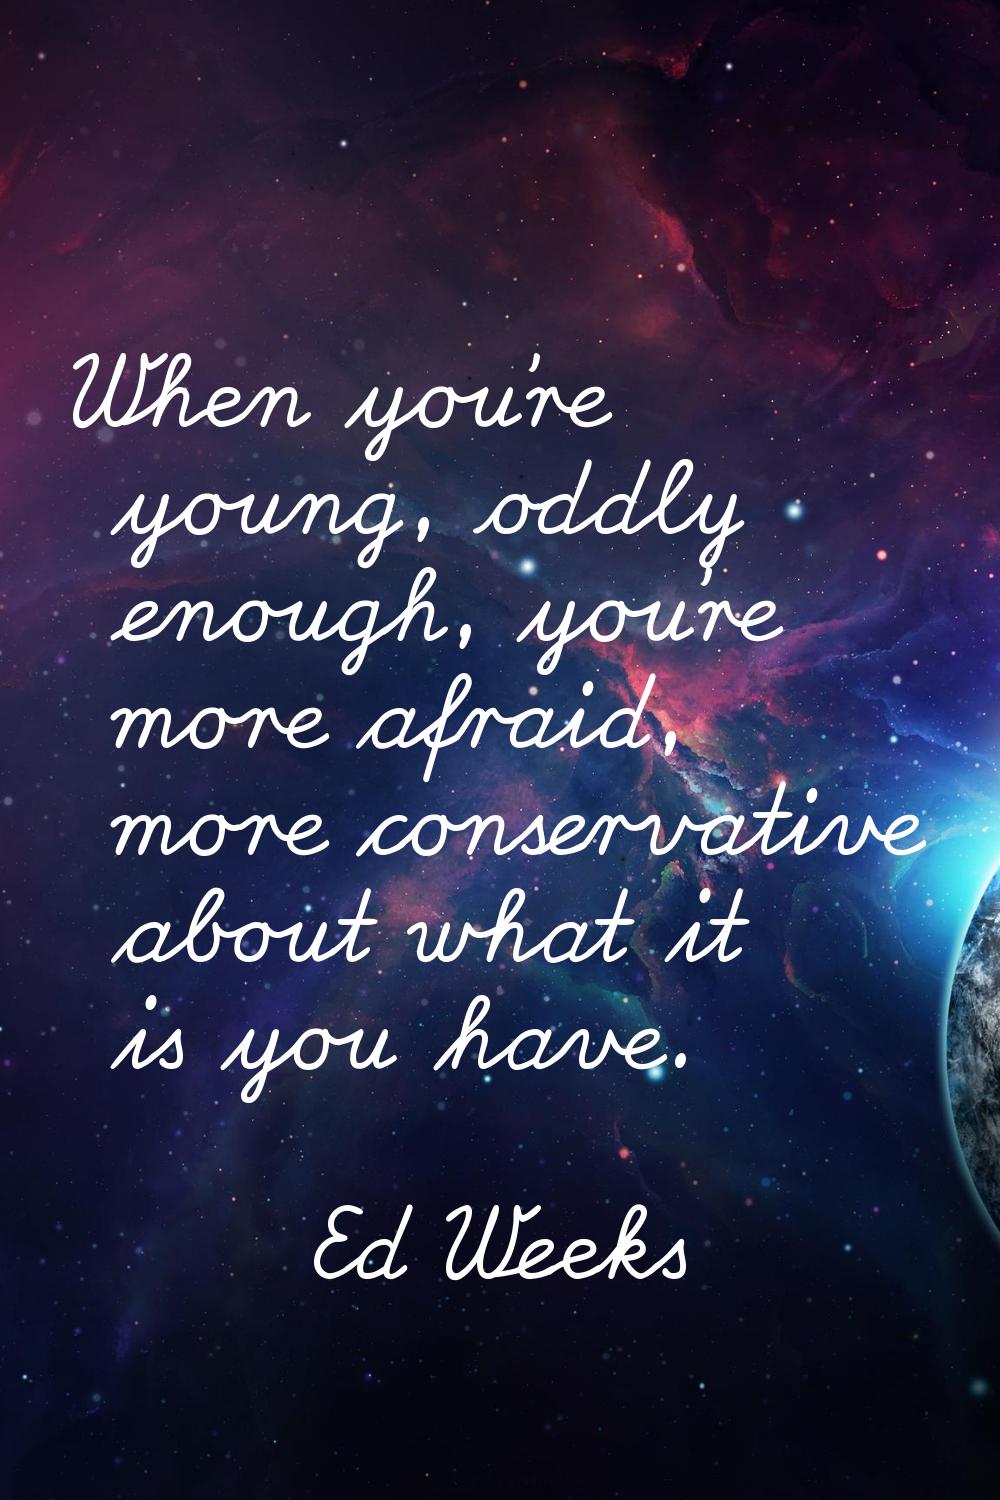 When you're young, oddly enough, you're more afraid, more conservative about what it is you have.